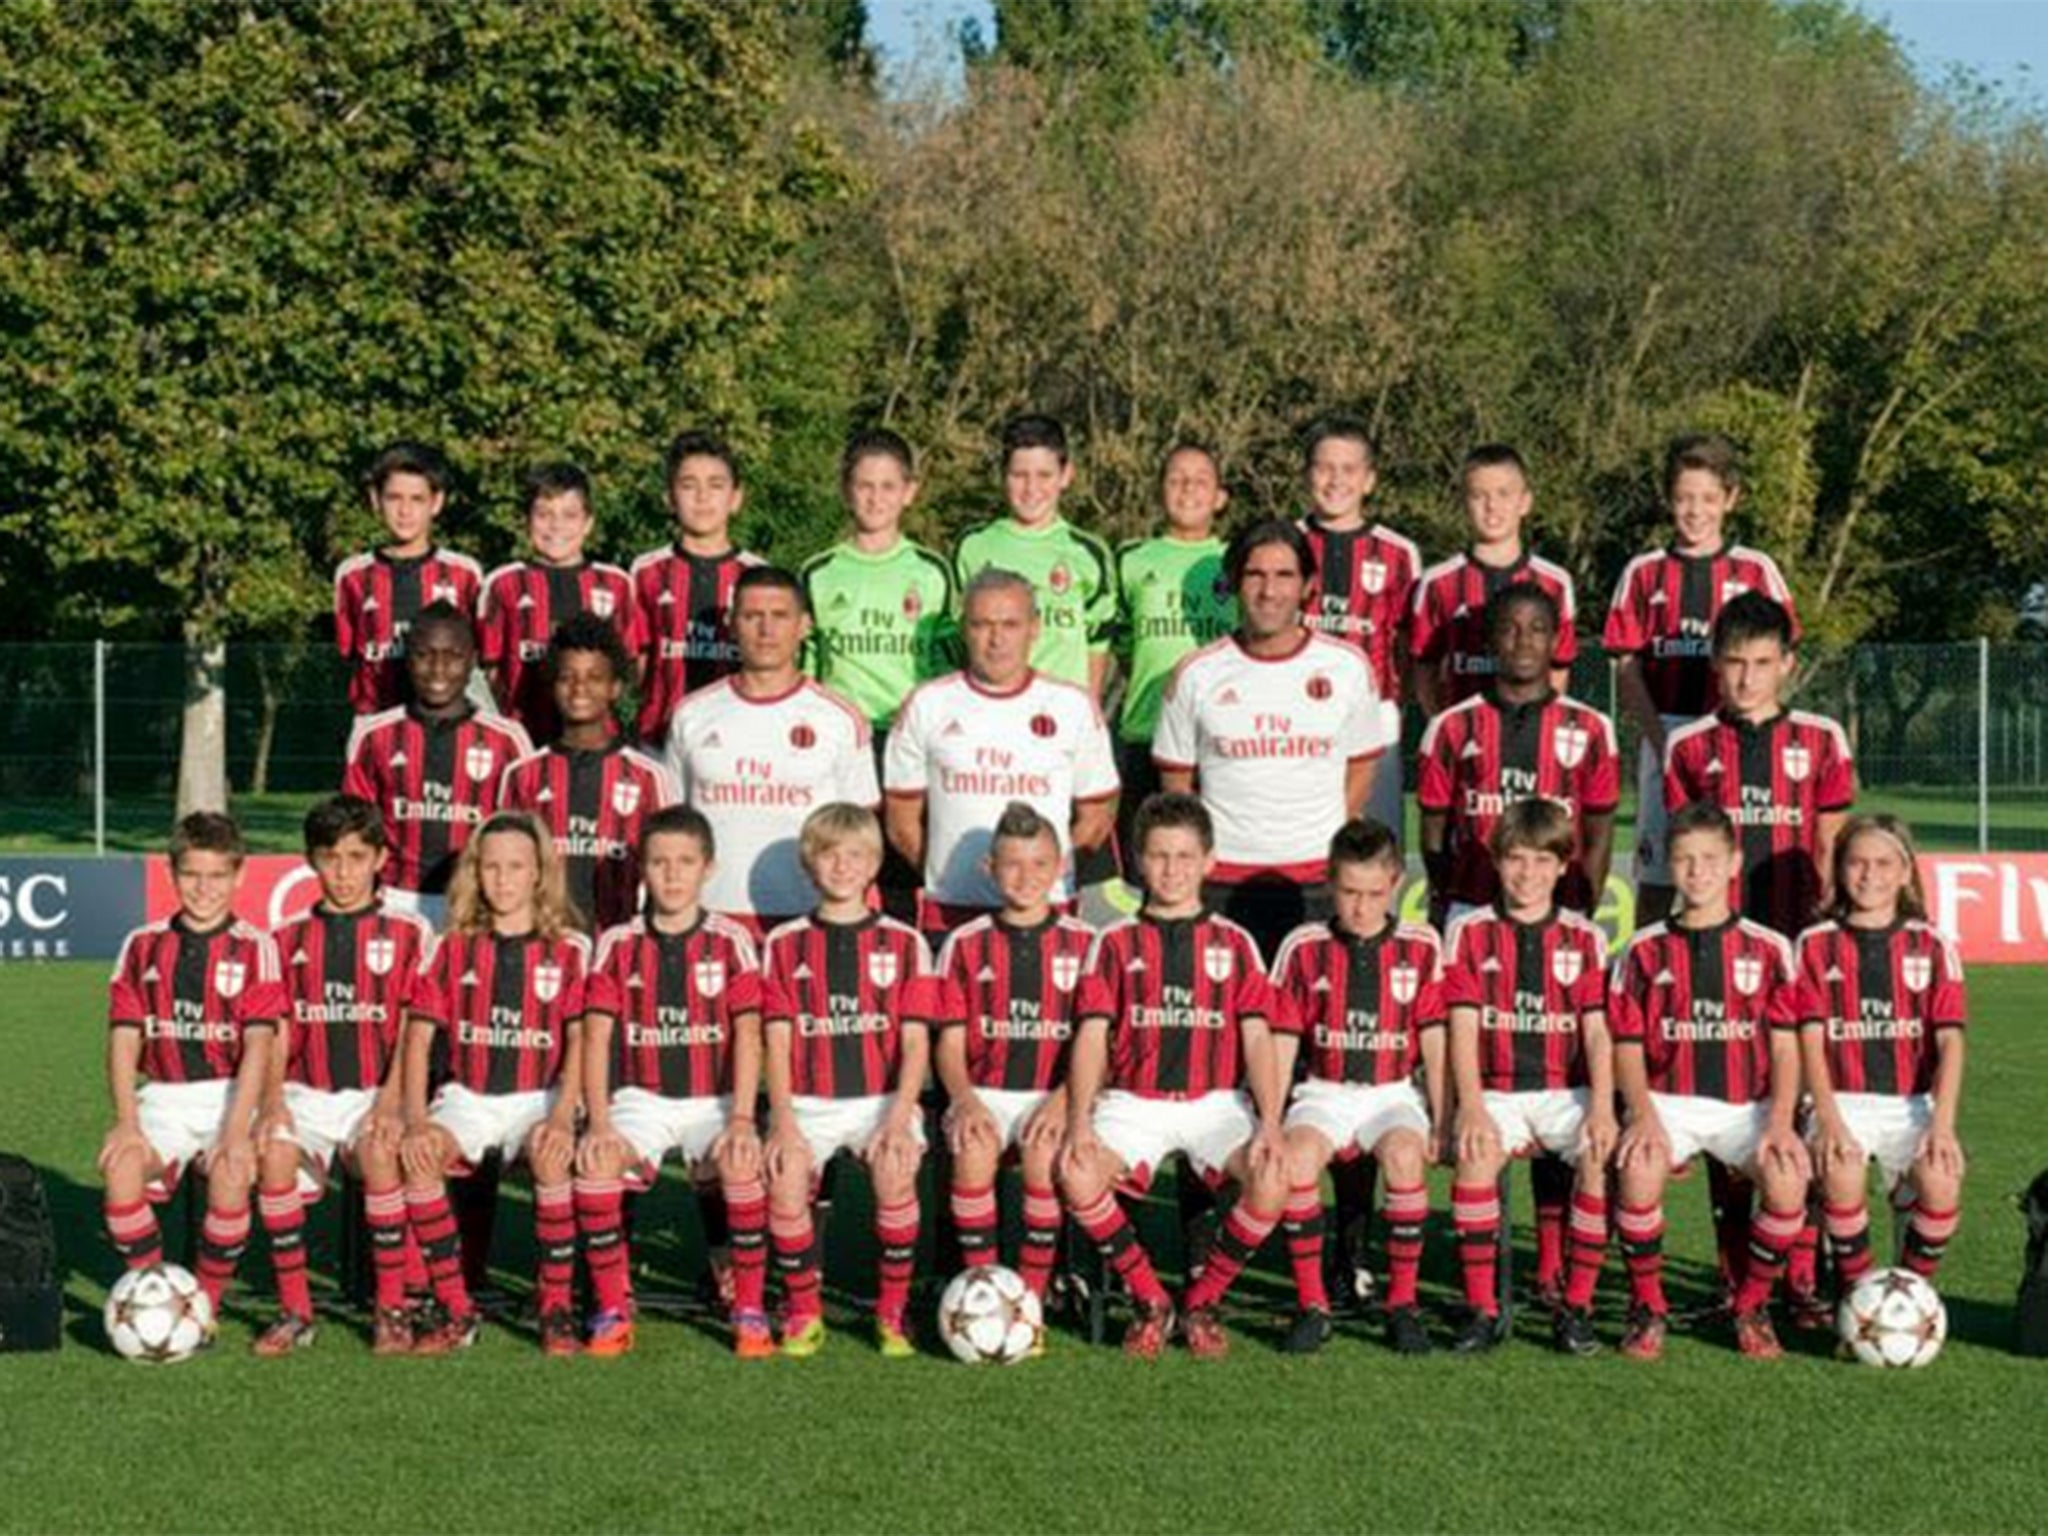 A team photo of the AC Milan Under-10s team posted on the Universal Cup Facebook page